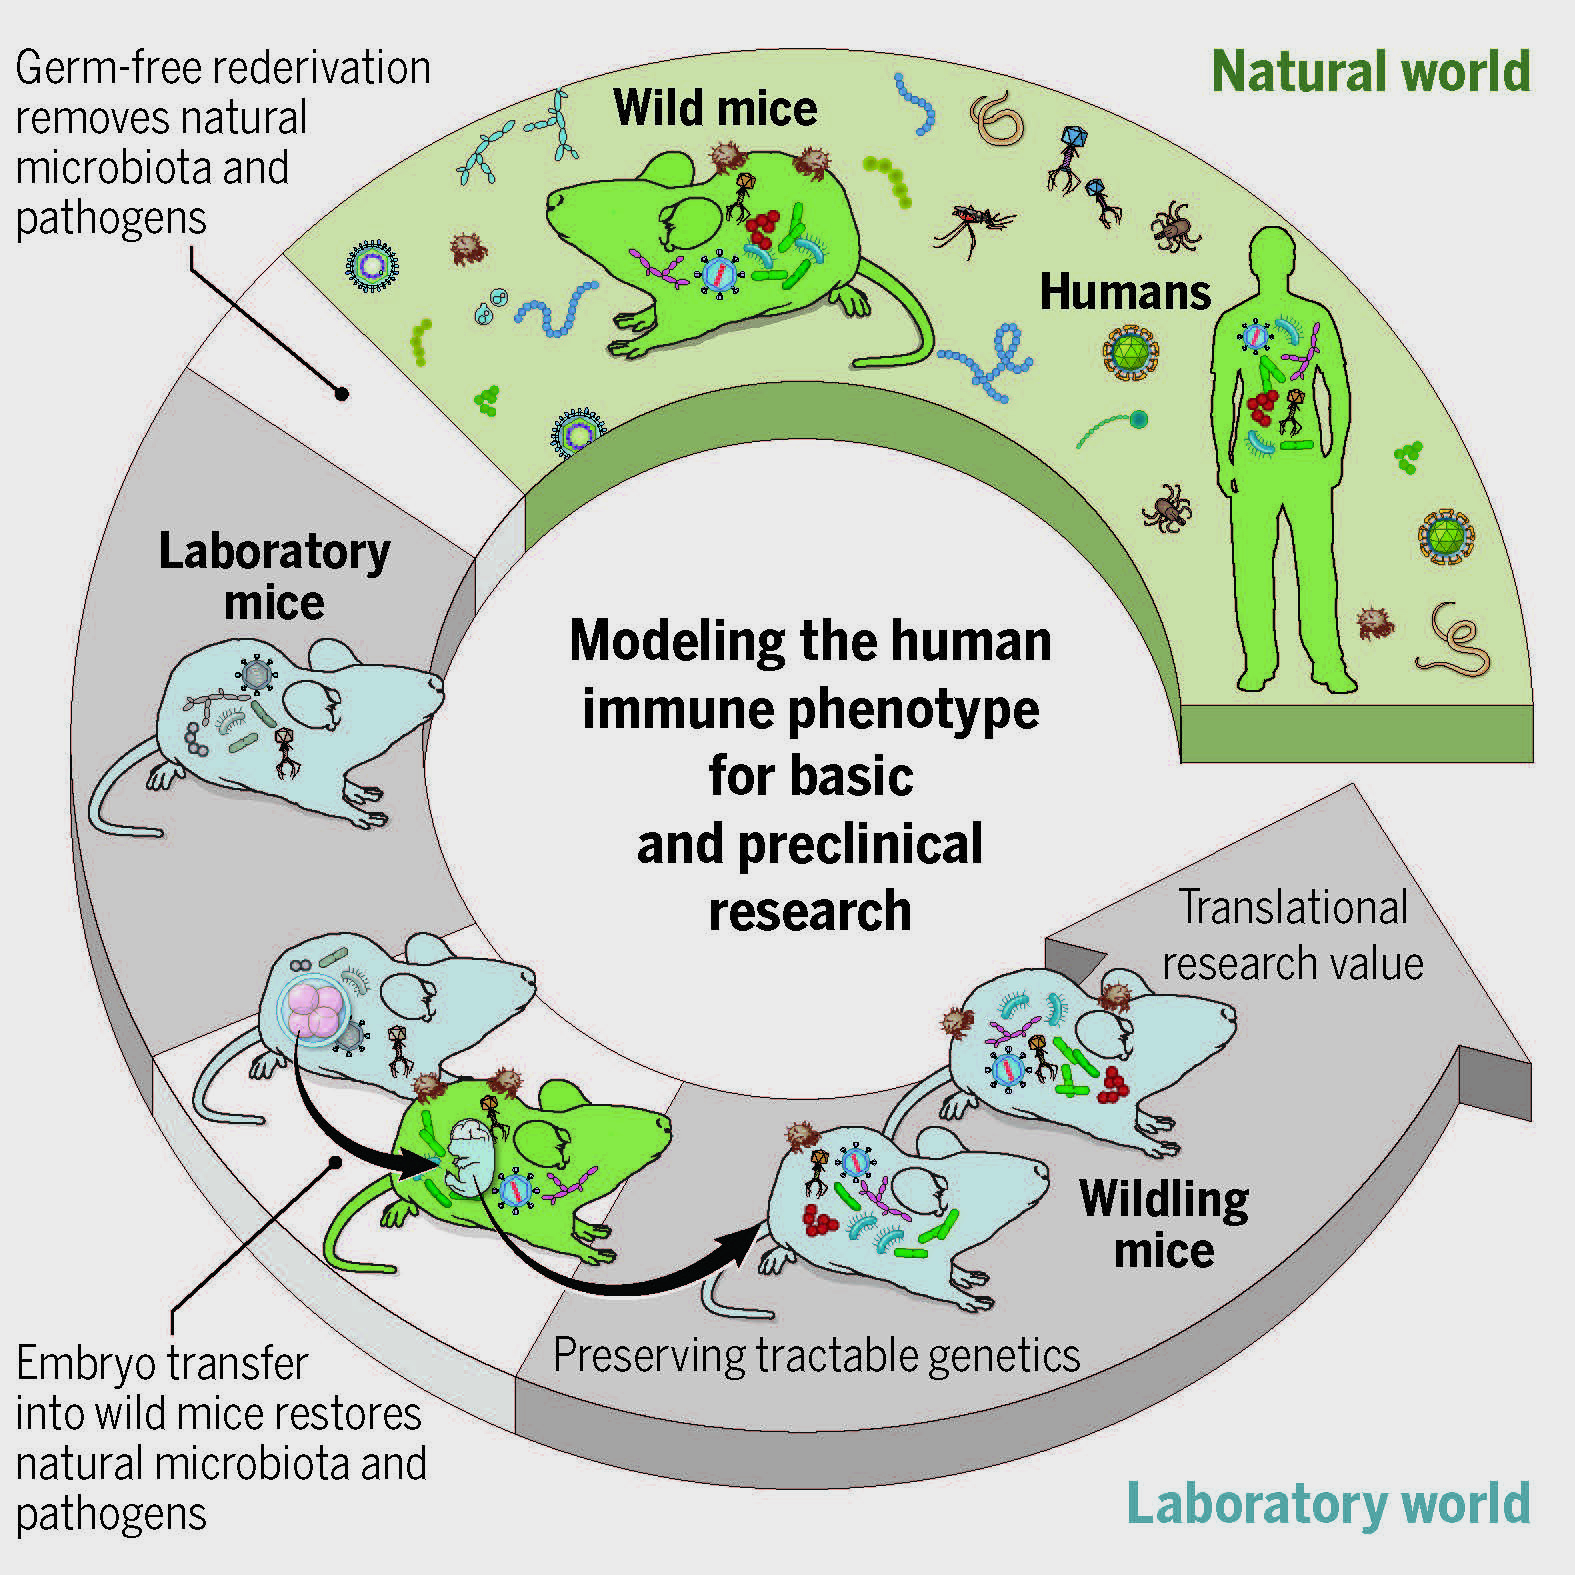 Wildling” mice could help translate results in animal models to results in  humans | National Institutes of Health (NIH)